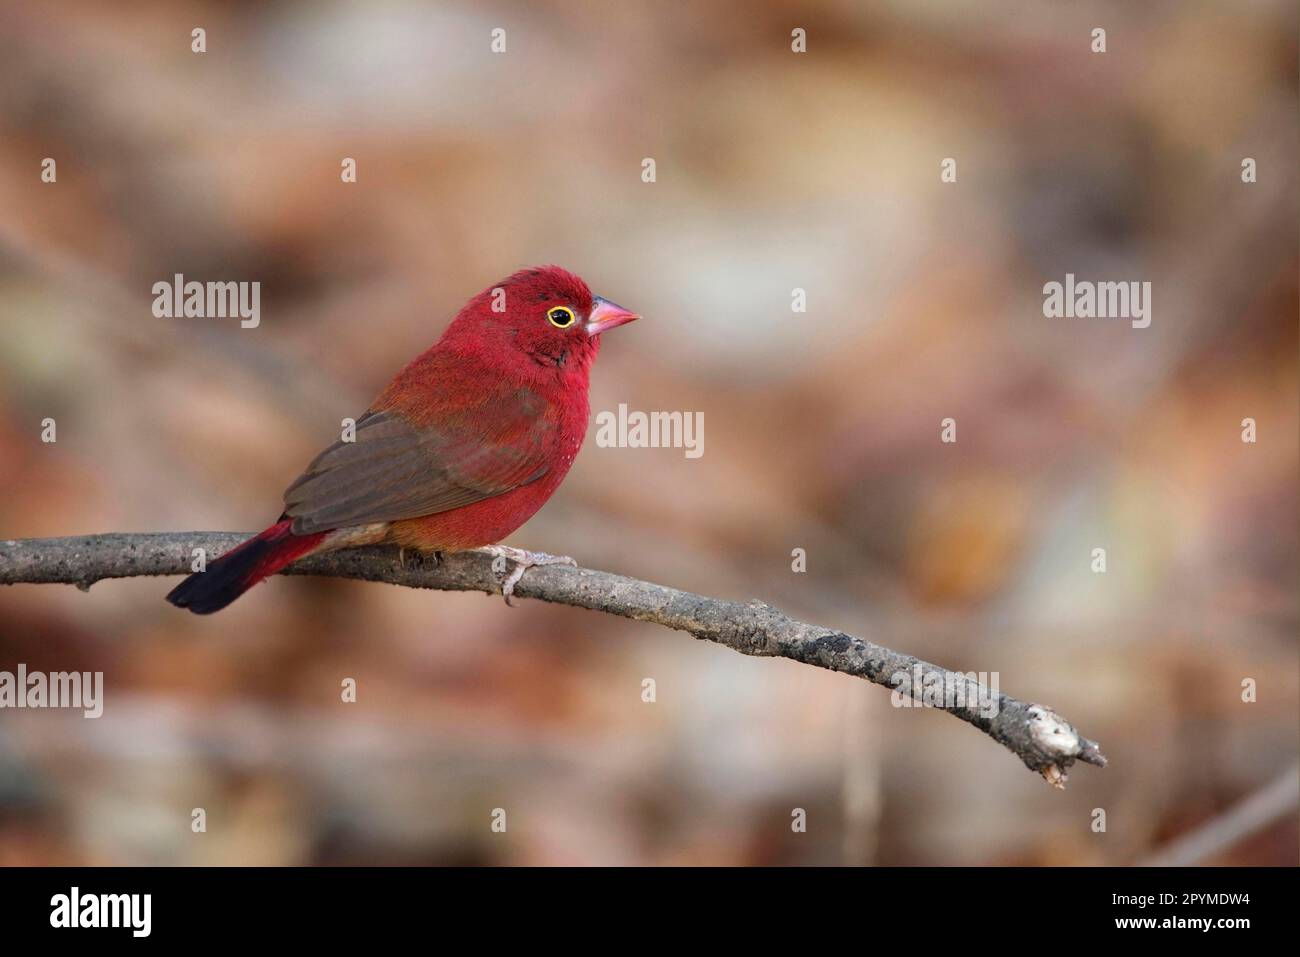 Red-billed firefinch (Lagonosticta senegala), adult male, sitting on a branch, Gambia Stock Photo